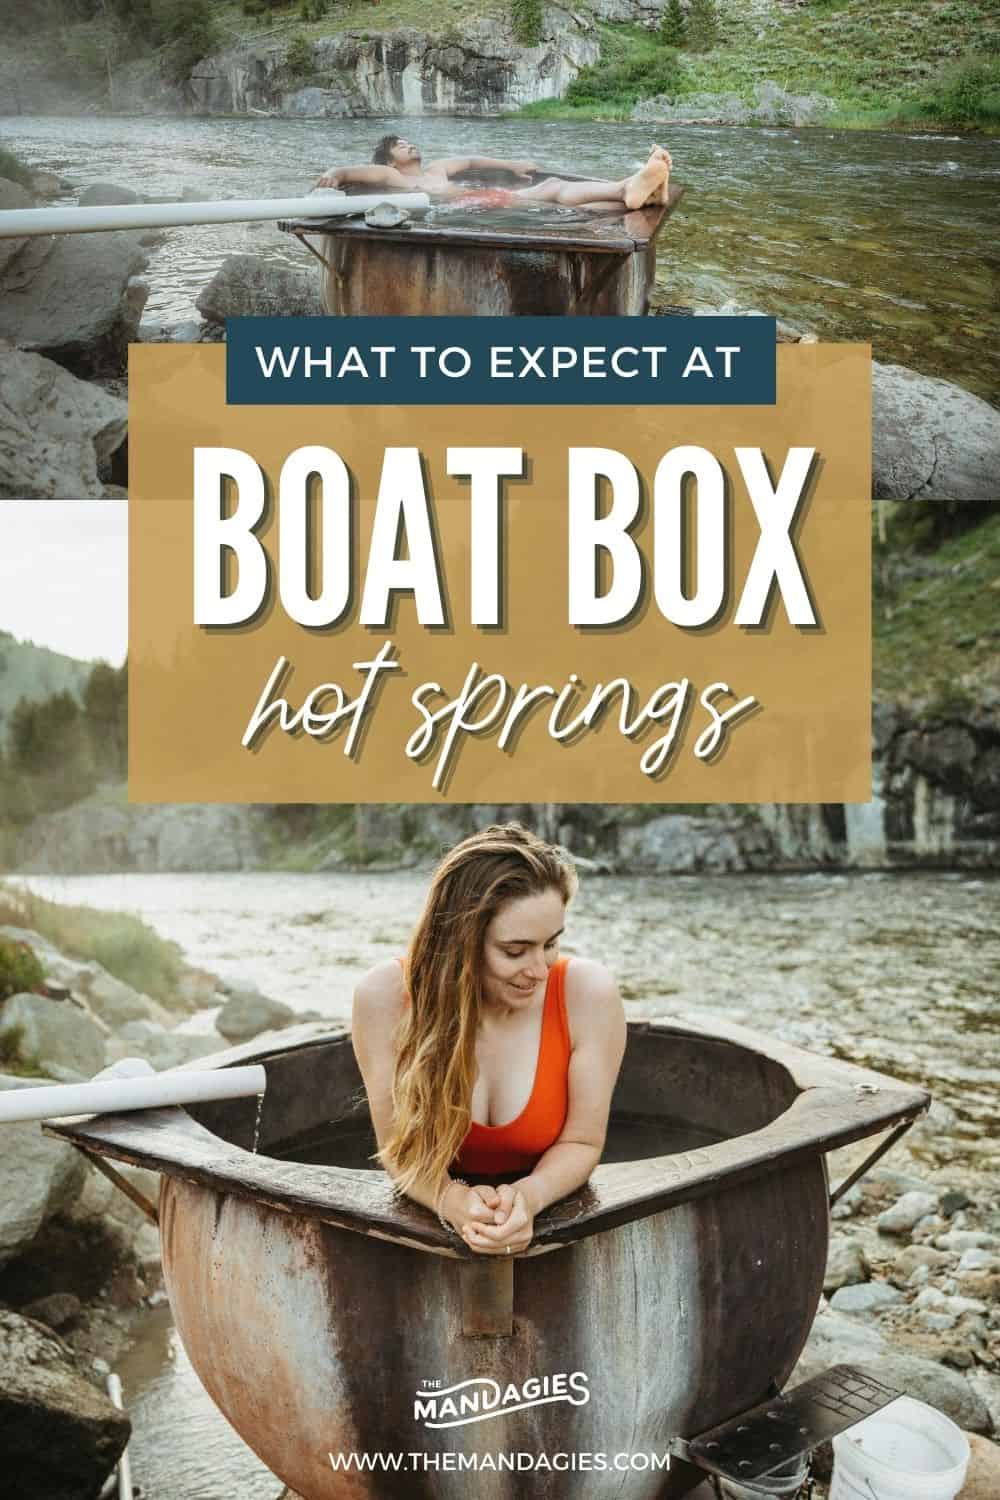 Situated on the Salmon River, Boat Box Hot Springs is a single-tub hot springs near Stanley, Idaho just waiting to be visited! We're giving you all the details and more here, including the best times to visit, what to pack, and sharing what it's like to come in different seasons! #idaho #hotsprings #stanleyidaho #Roadtrip #summer #hiking #camping #salmonriver #boatbox #mountains #travel #USAtravel #usa #photography #sunset #stanley